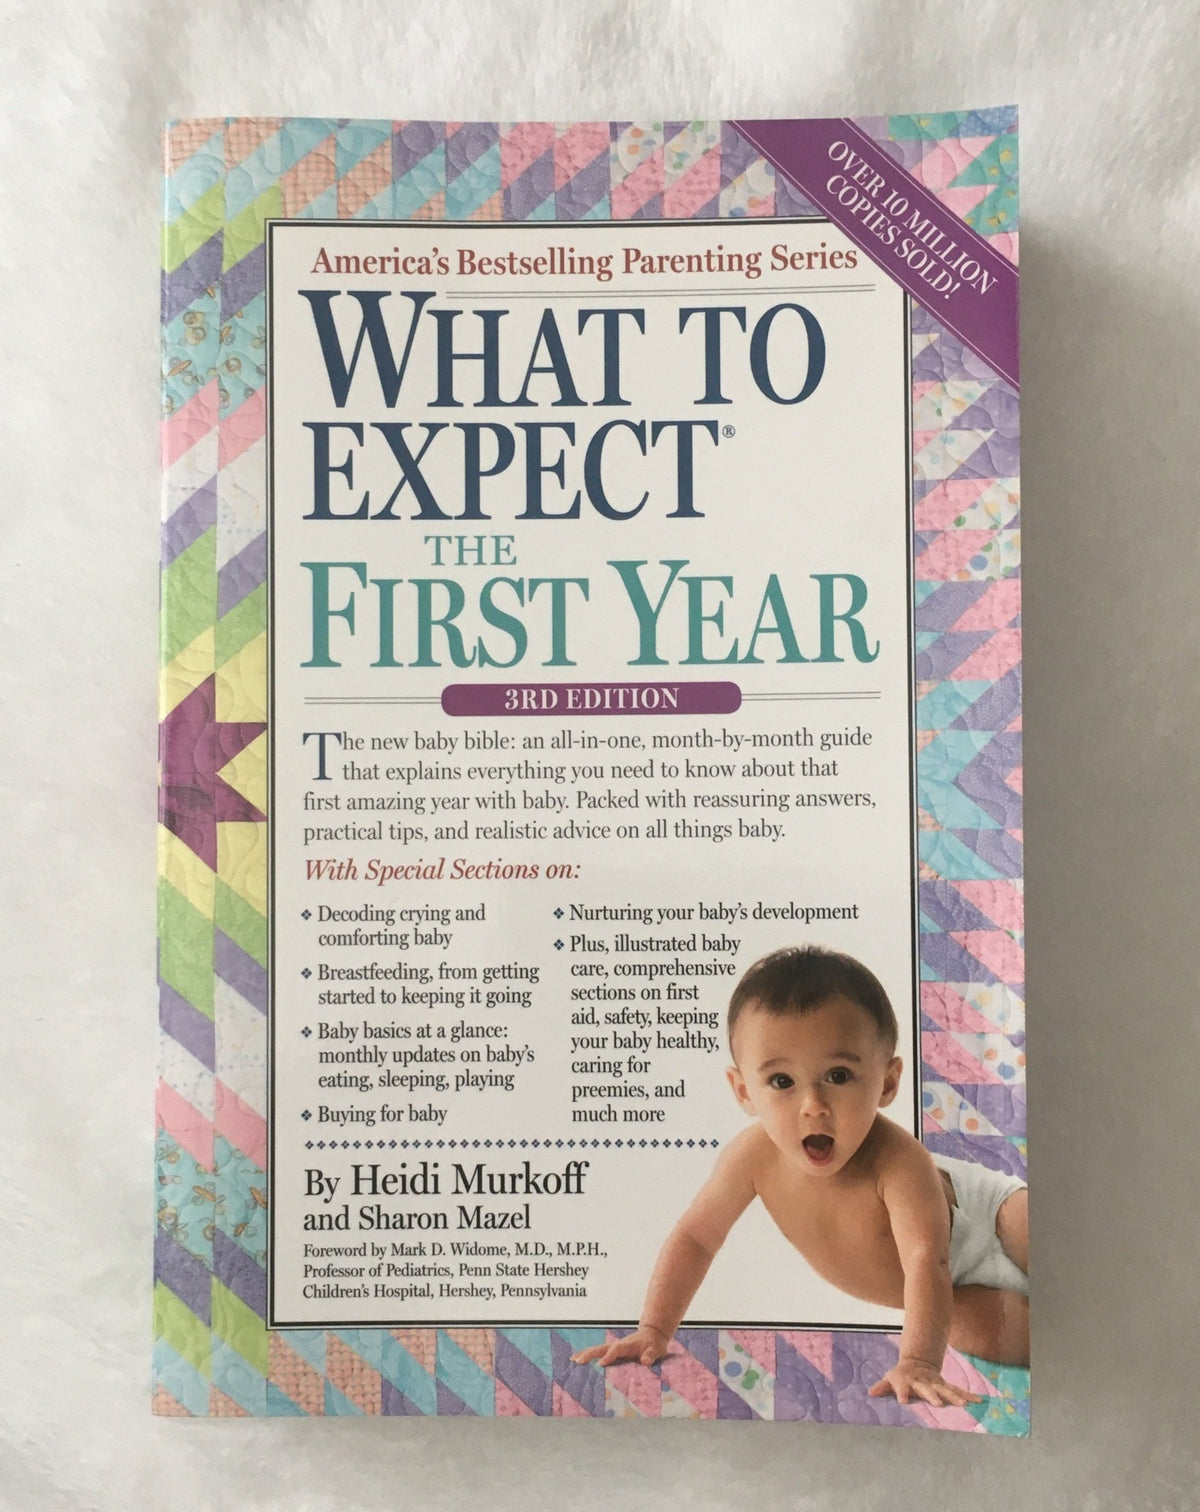 What to Expect the First Year by Heidi Murkoff, book, Ten Dollar Books, Ten Dollar Books